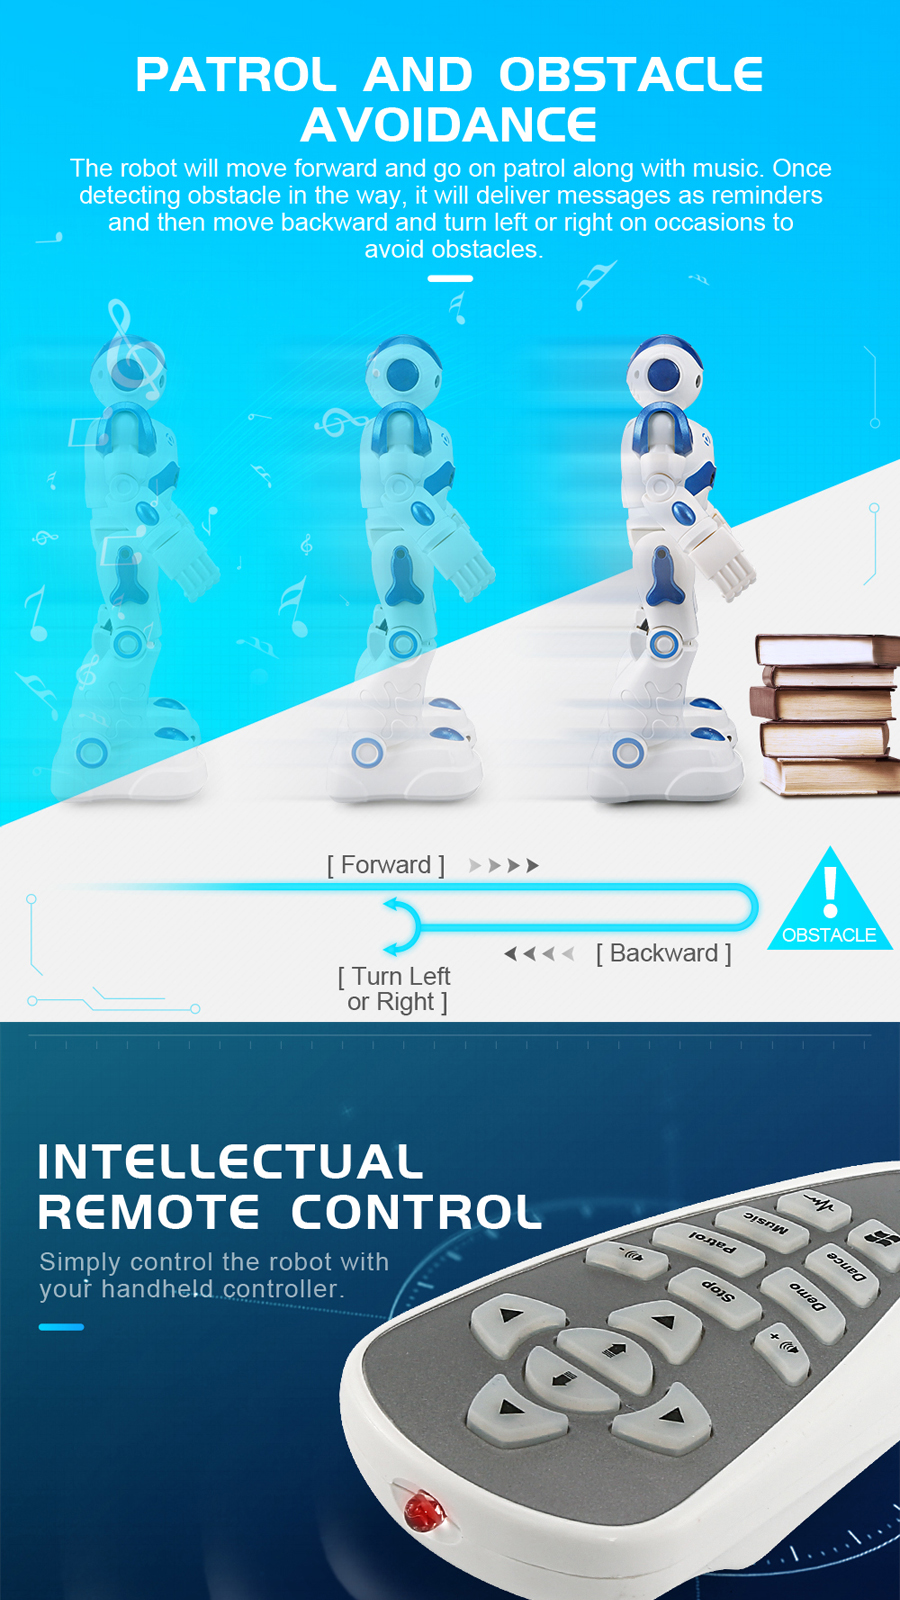 JJRC-R2-Cady-USB-Charging-Dancing-Gesture-Control-Robot-Toy-1181780